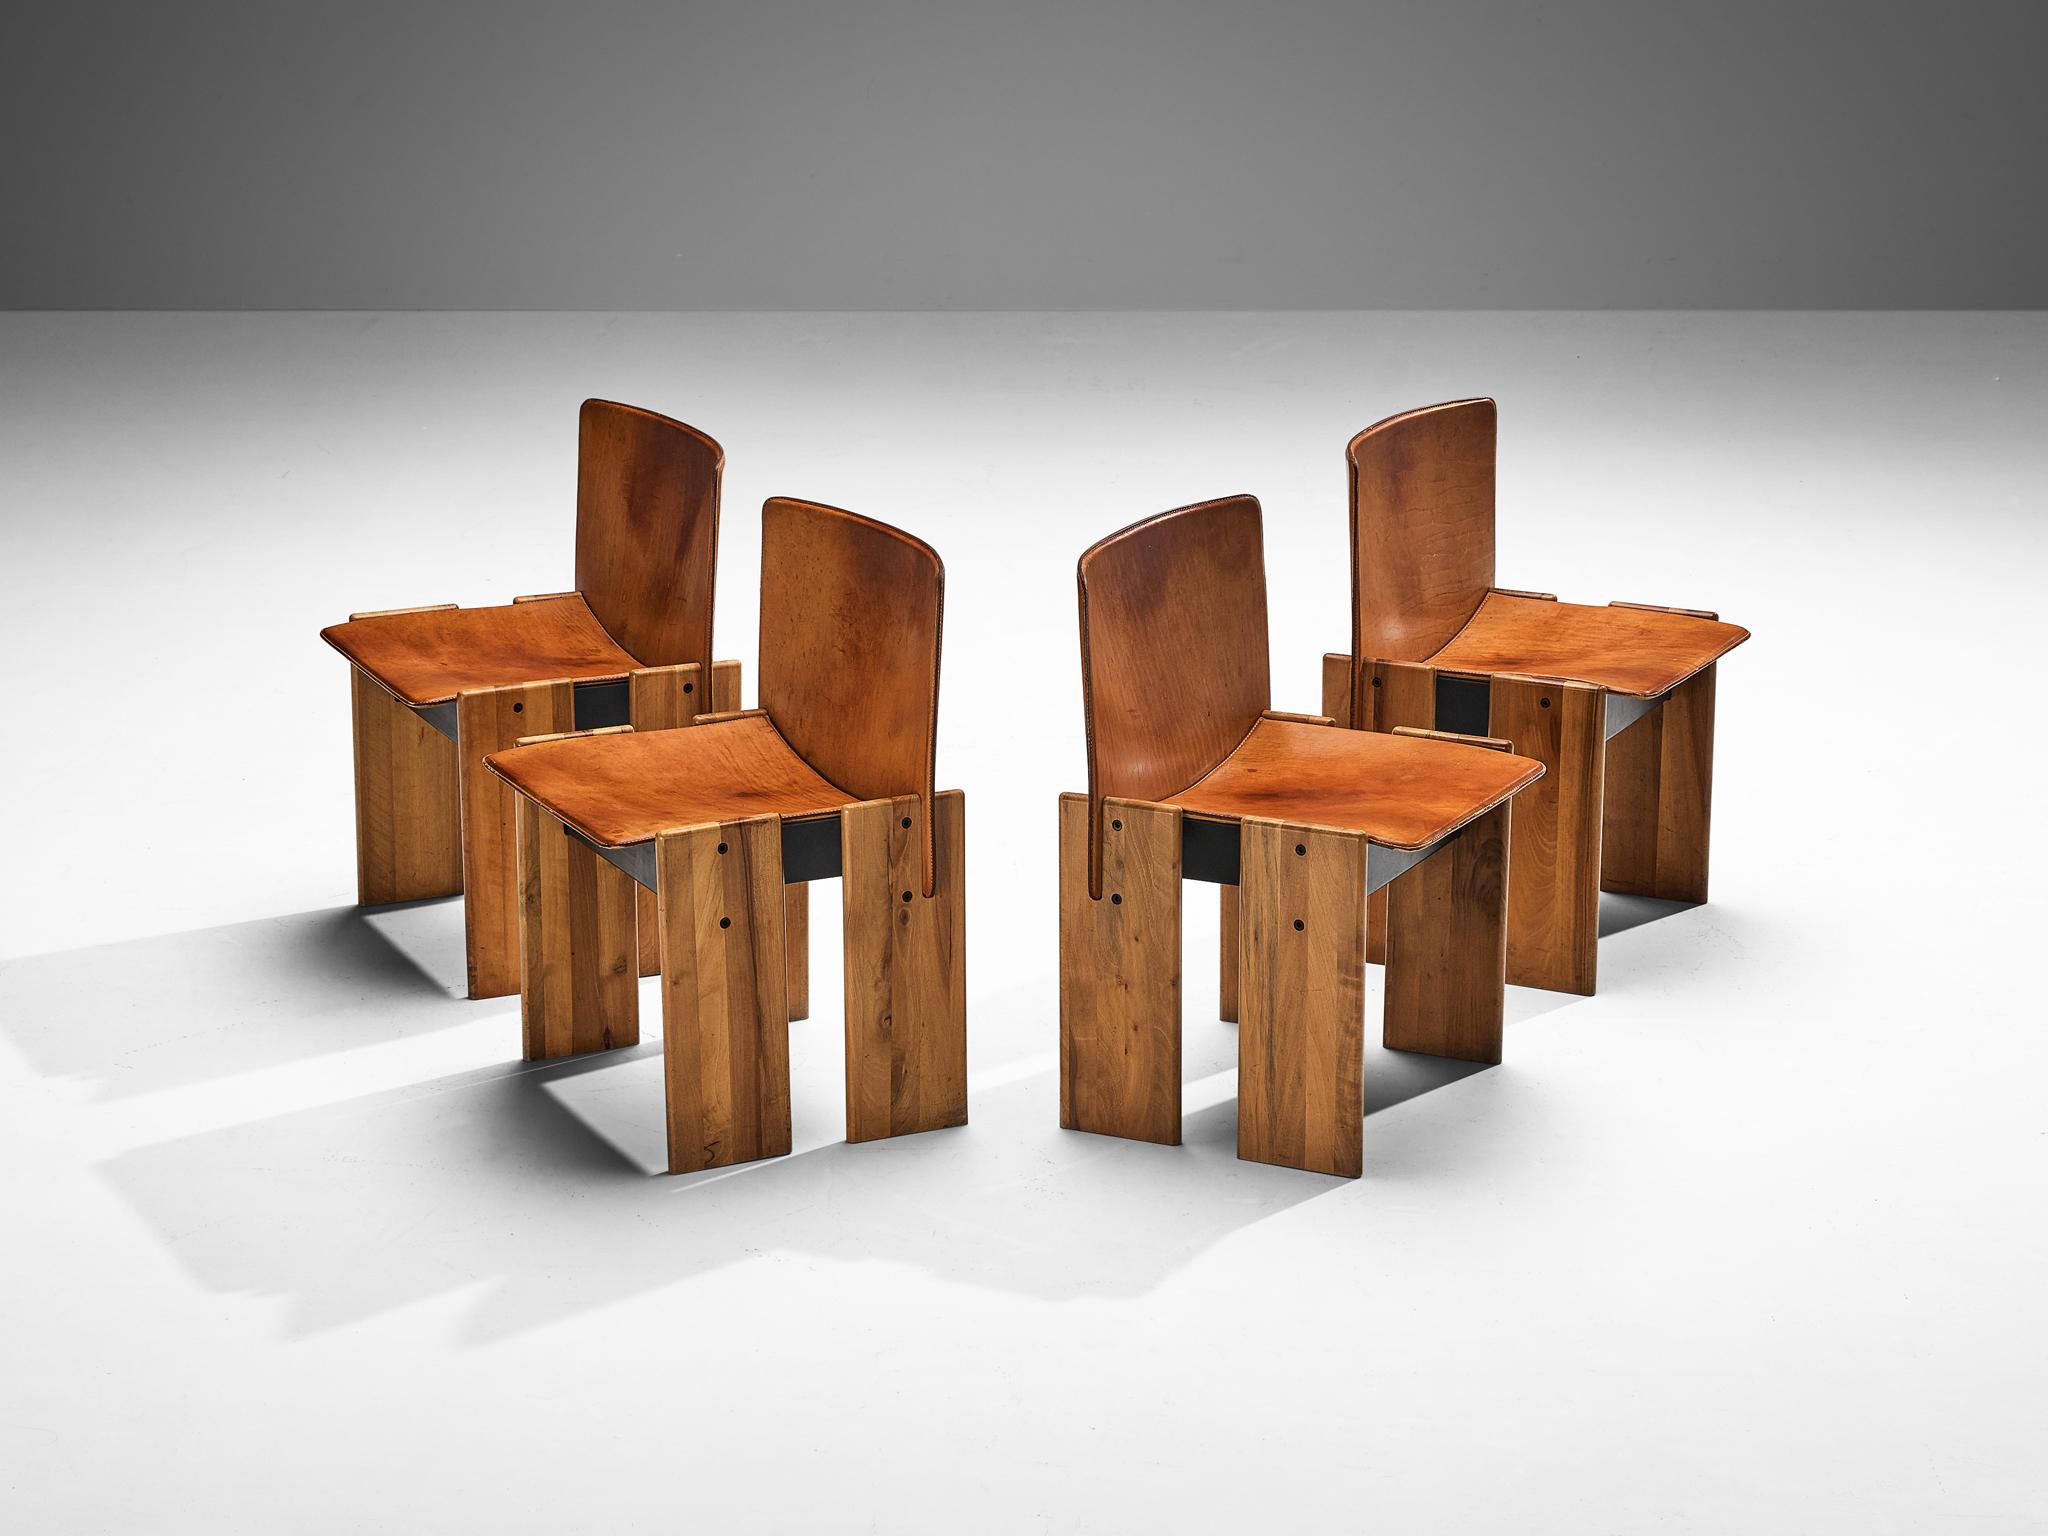 Barsacchi & Vegni, set of four dining chairs, model 'Avila', walnut, leather, metal, Italy 1970s  

Lovely set of four sturdy and beautiful dining chairs with strong resemblance to the designs of Afra & Tobia Scarpa. This set of chairs catches the